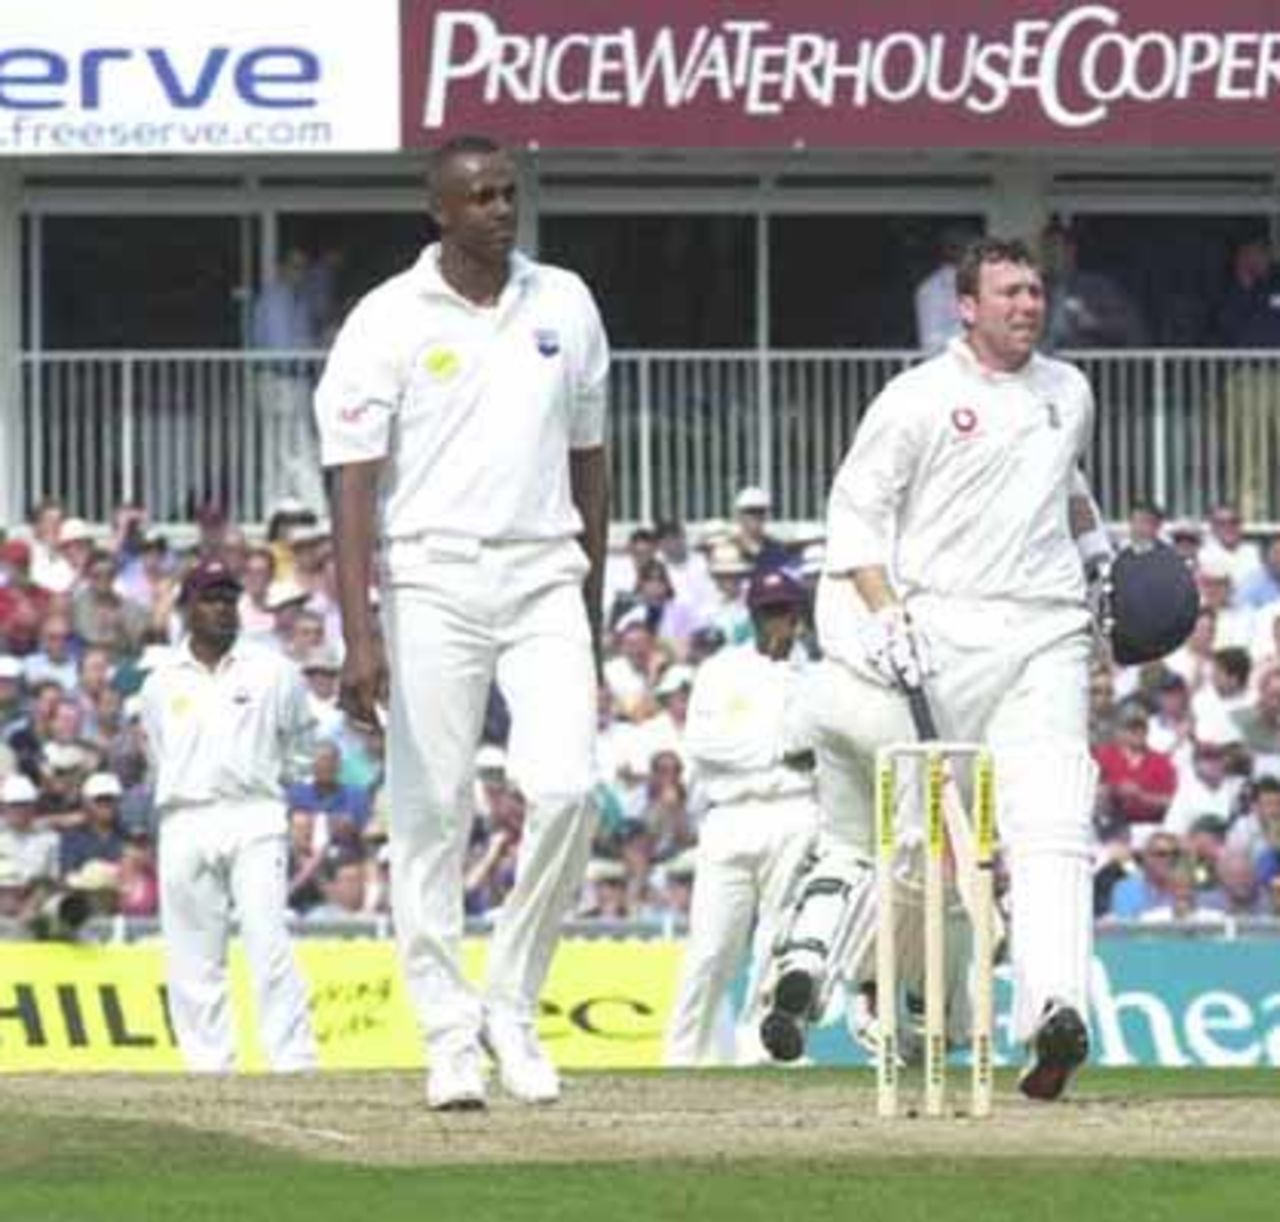 The Cornhill Insurance Test Match at the Oval, England v West Indies 2000